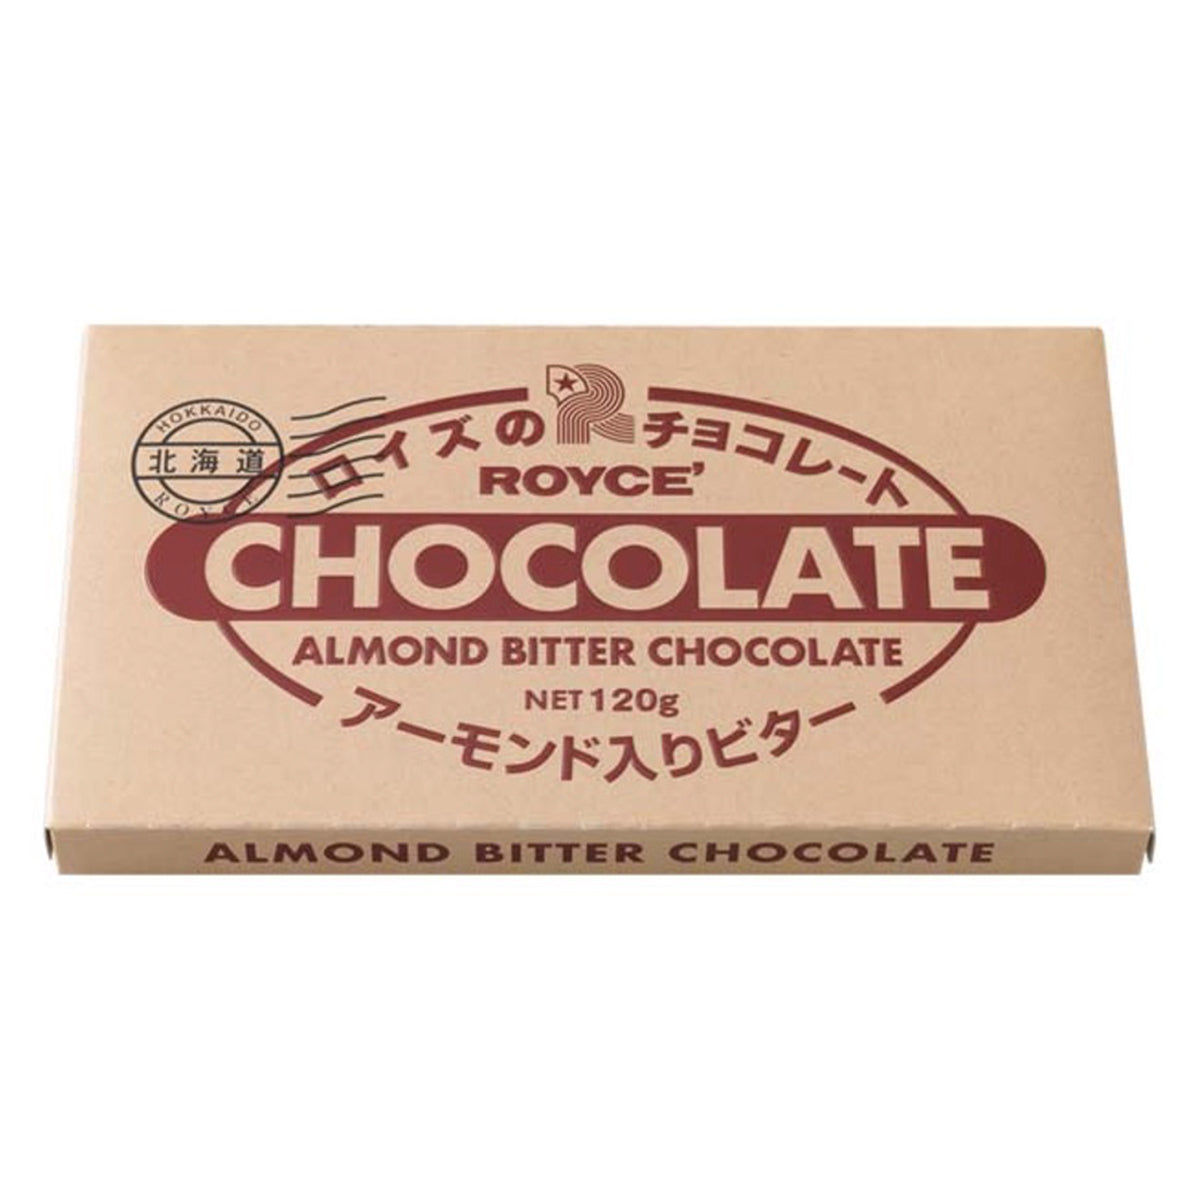 ROYCE' Chocolate - Chocolate Bar "Almond Bitter" - Image shows a chocolate carton. Text in black says Hokkaido ROYCE'. Text in red says ROYCE' Chocolate Almond Bitter Chocolate Net 120g. Text on bottom part says Almond Bitter Chocolate.